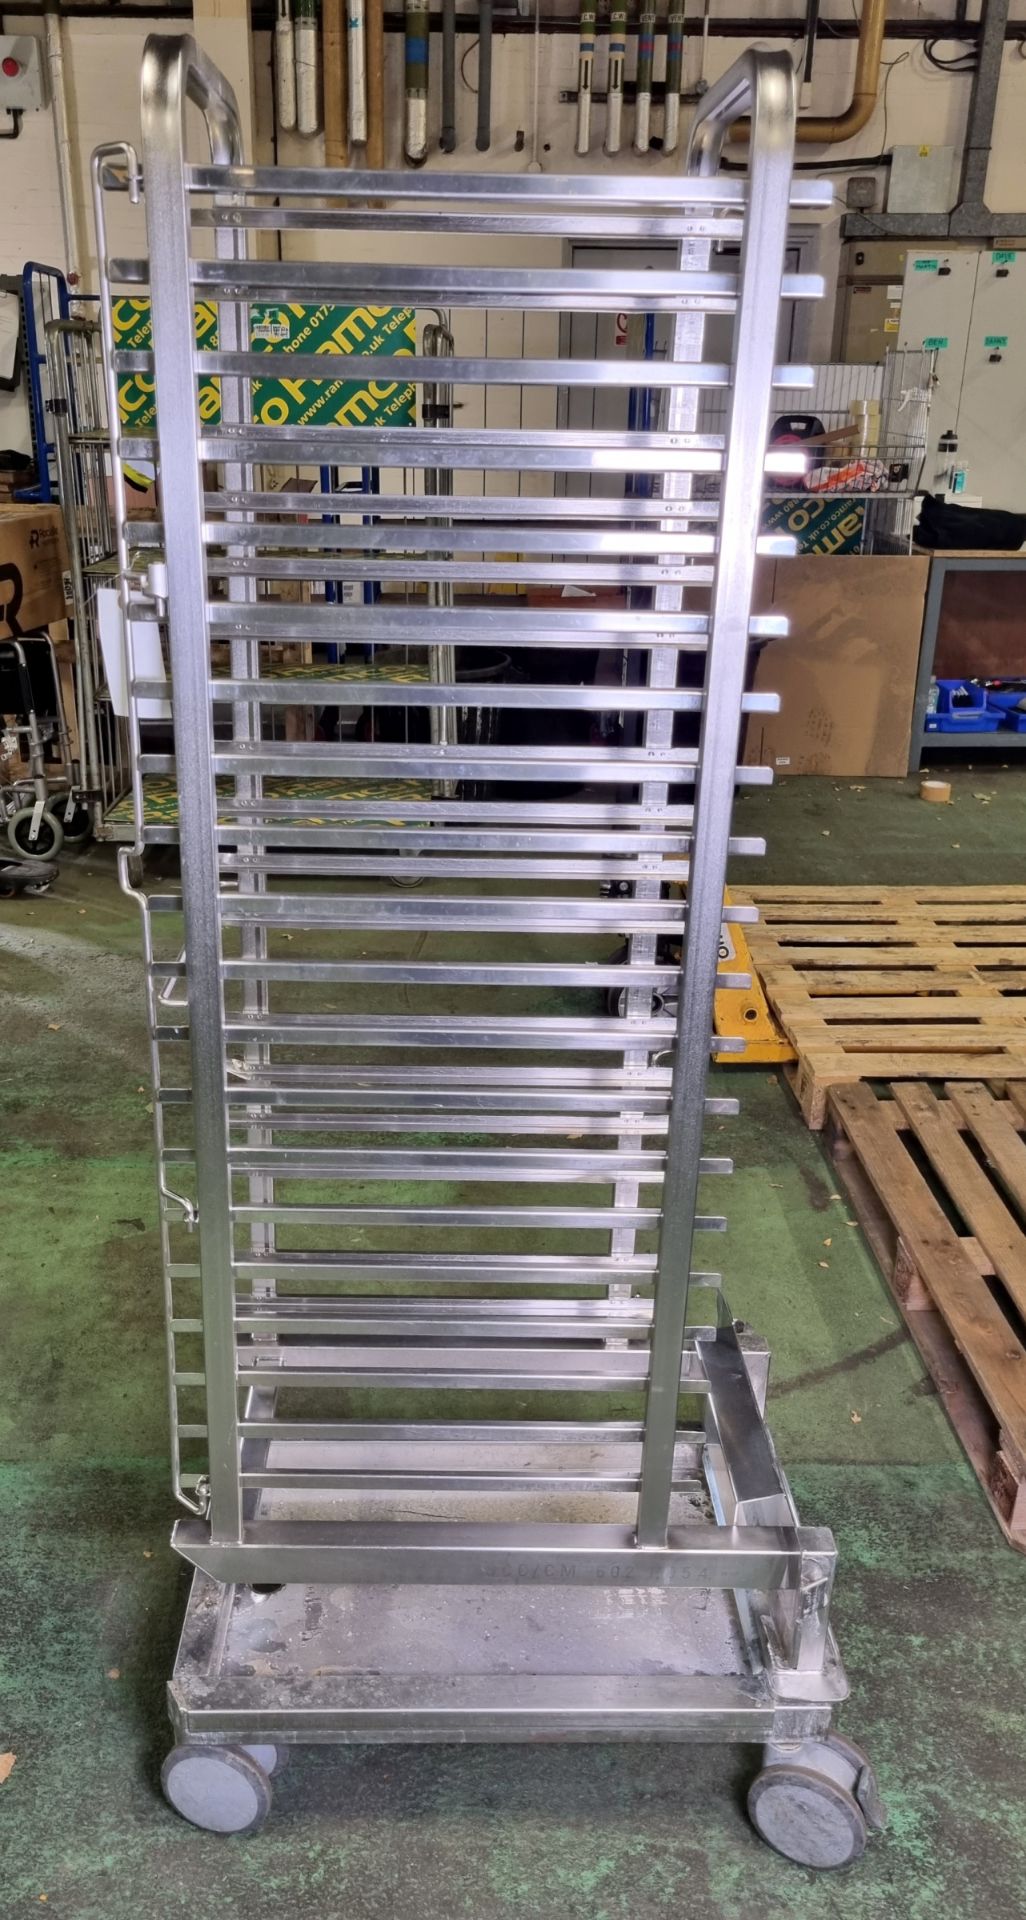 Stainless steel 20 tray mobile oven rack - W 470 x D 720 x H 1720mm